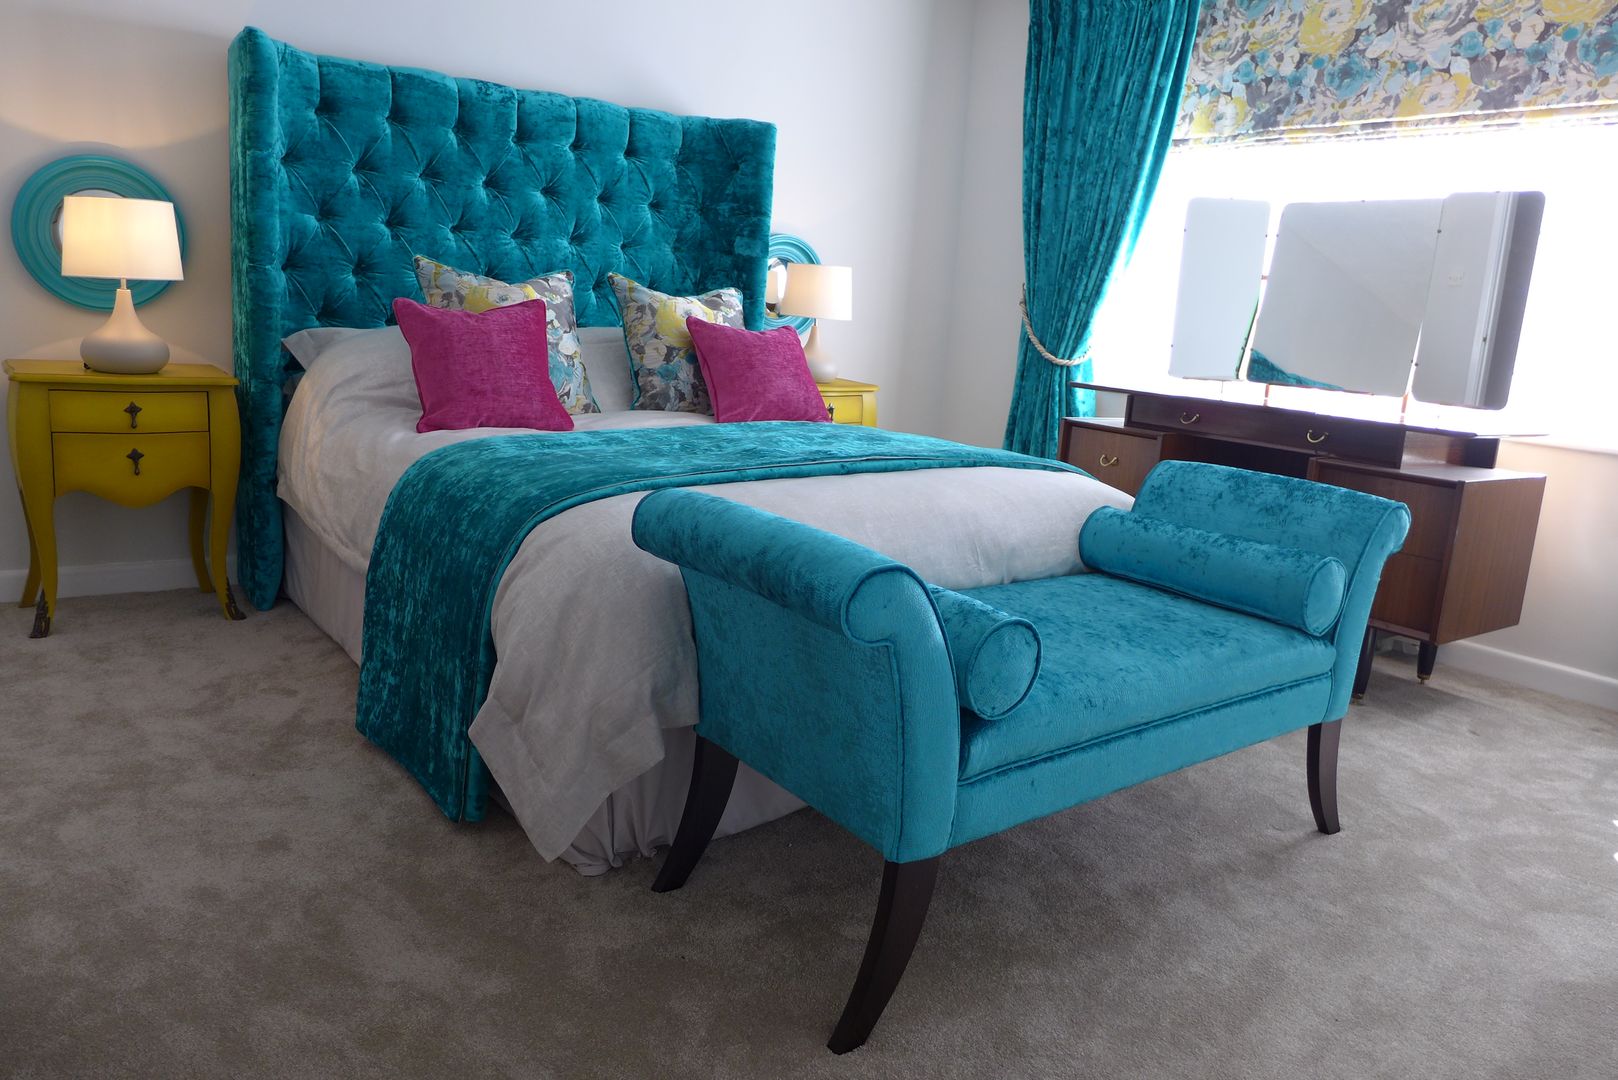 hotel style bedroom Style Within Спальня bed end chaise,blue velvet,dress curtains,roman blind,pink accents,velvet headboard,fabric headboard,boutique bedroom,hotel style bedroom